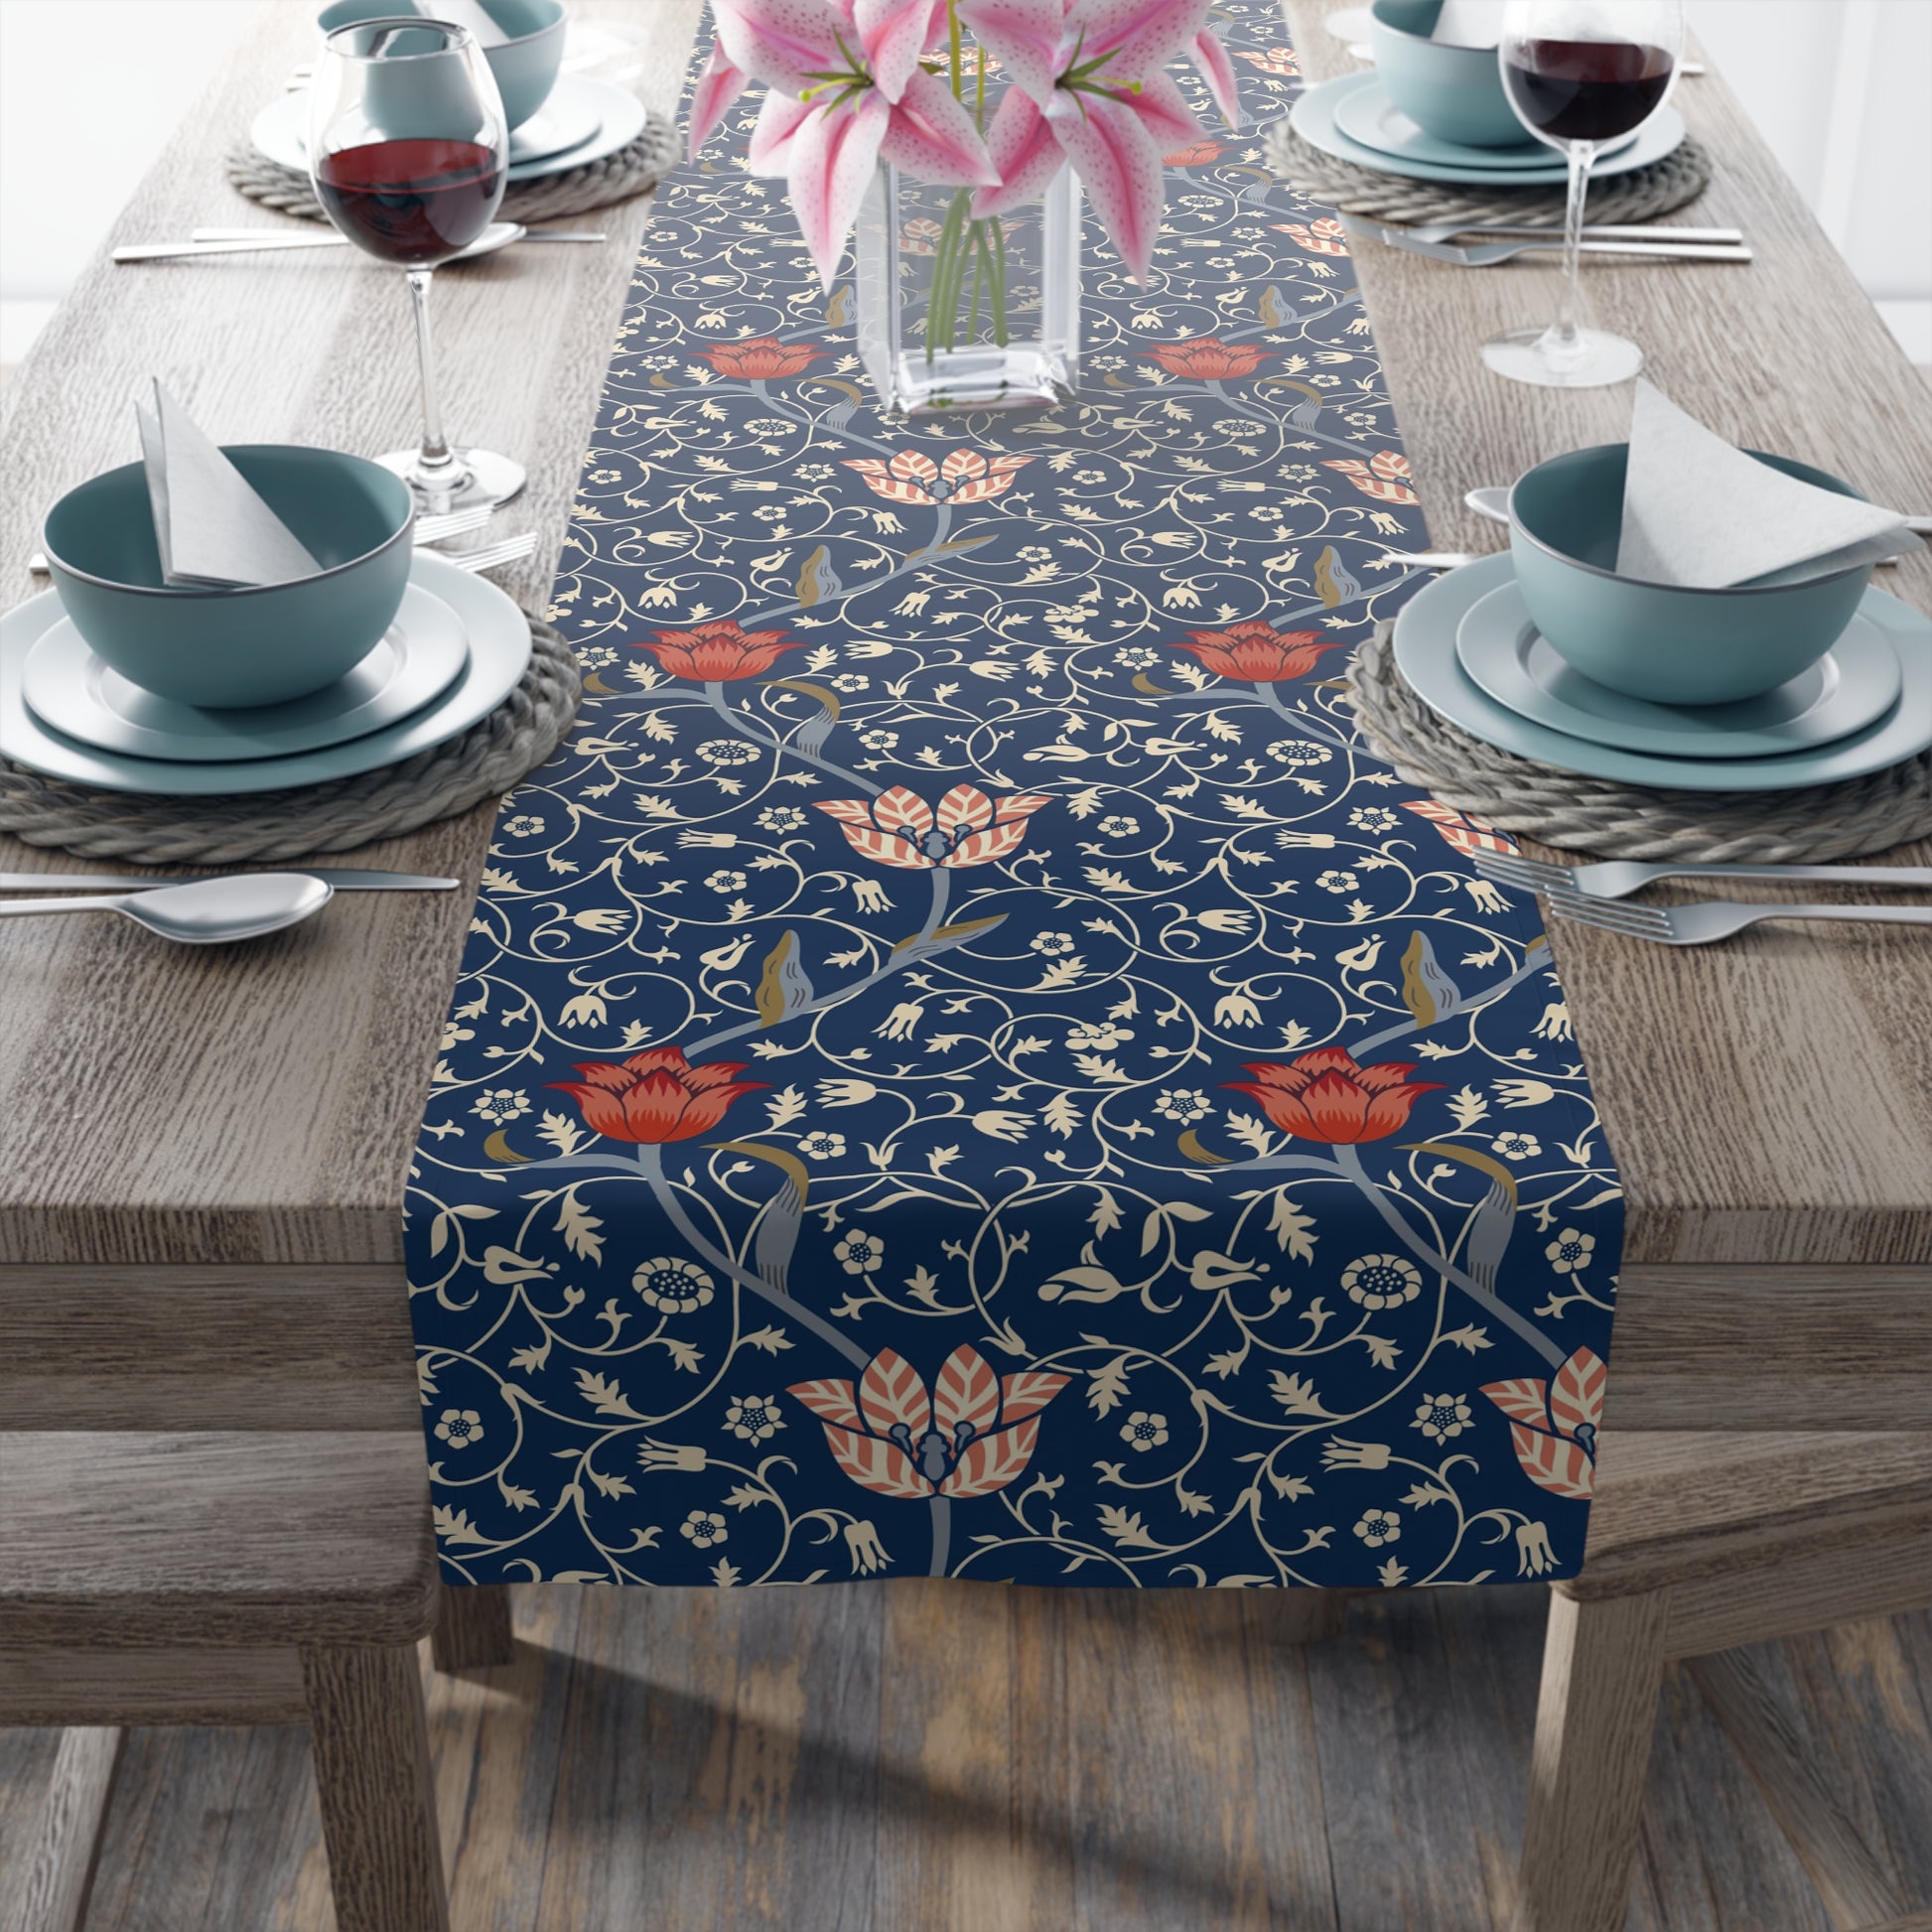 william-morris-co-table-runner-medway-collection-9